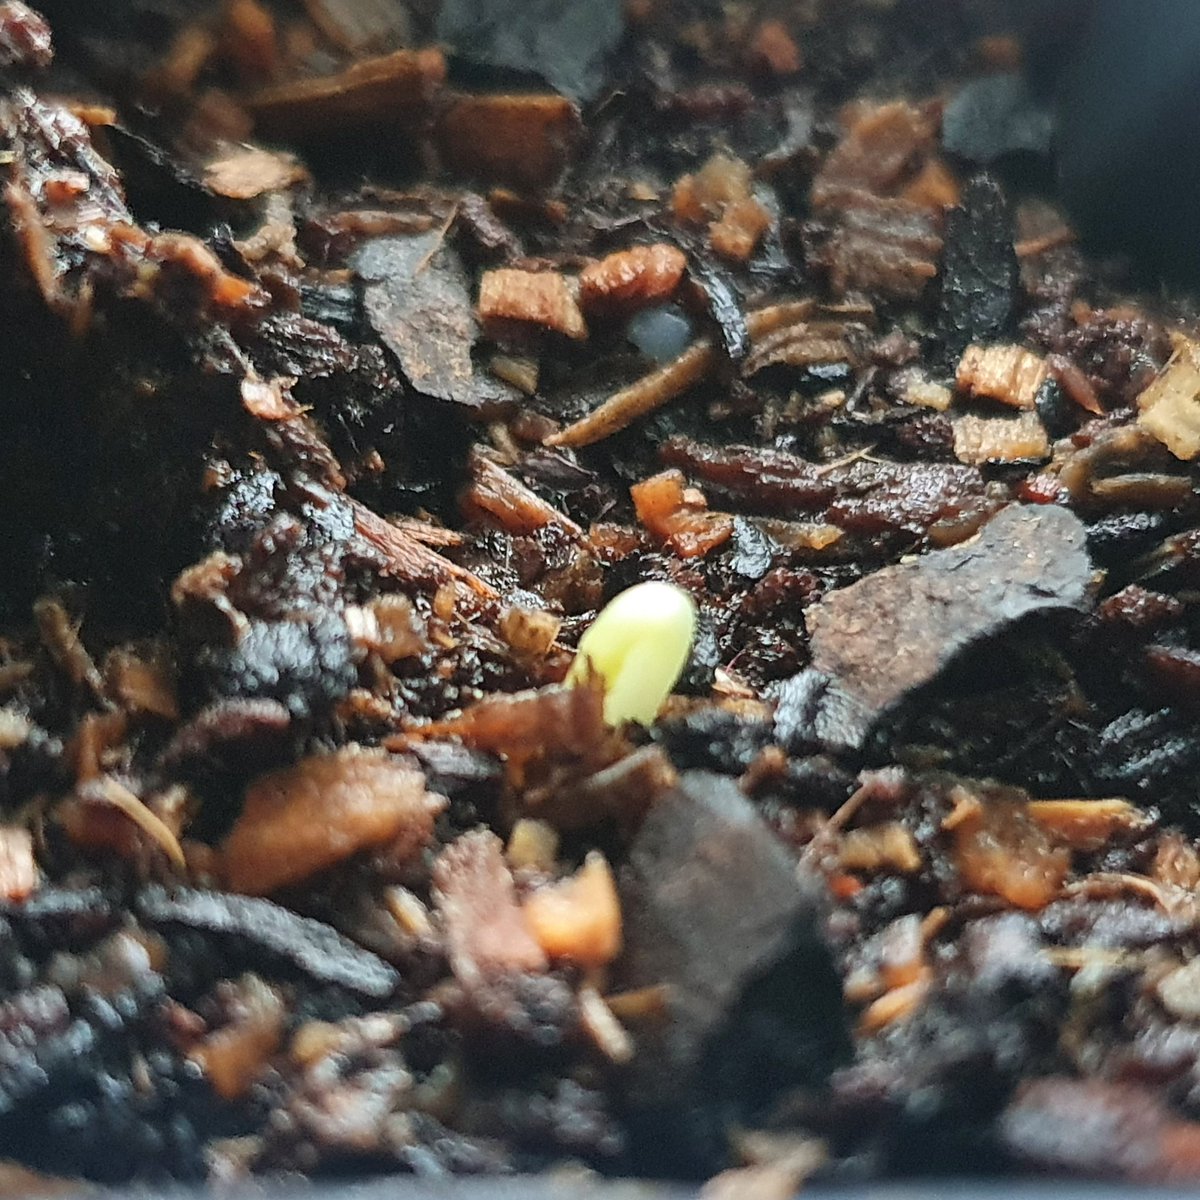 Planted sweet peas 5 days ago. Excitement overload this morning, here is the first little shoot! Spring is my favourite time of year. Love making a life! @gomidsussex @wardenpark @midsussex_times #newgrowth #createalife #babyplants #springiscoming